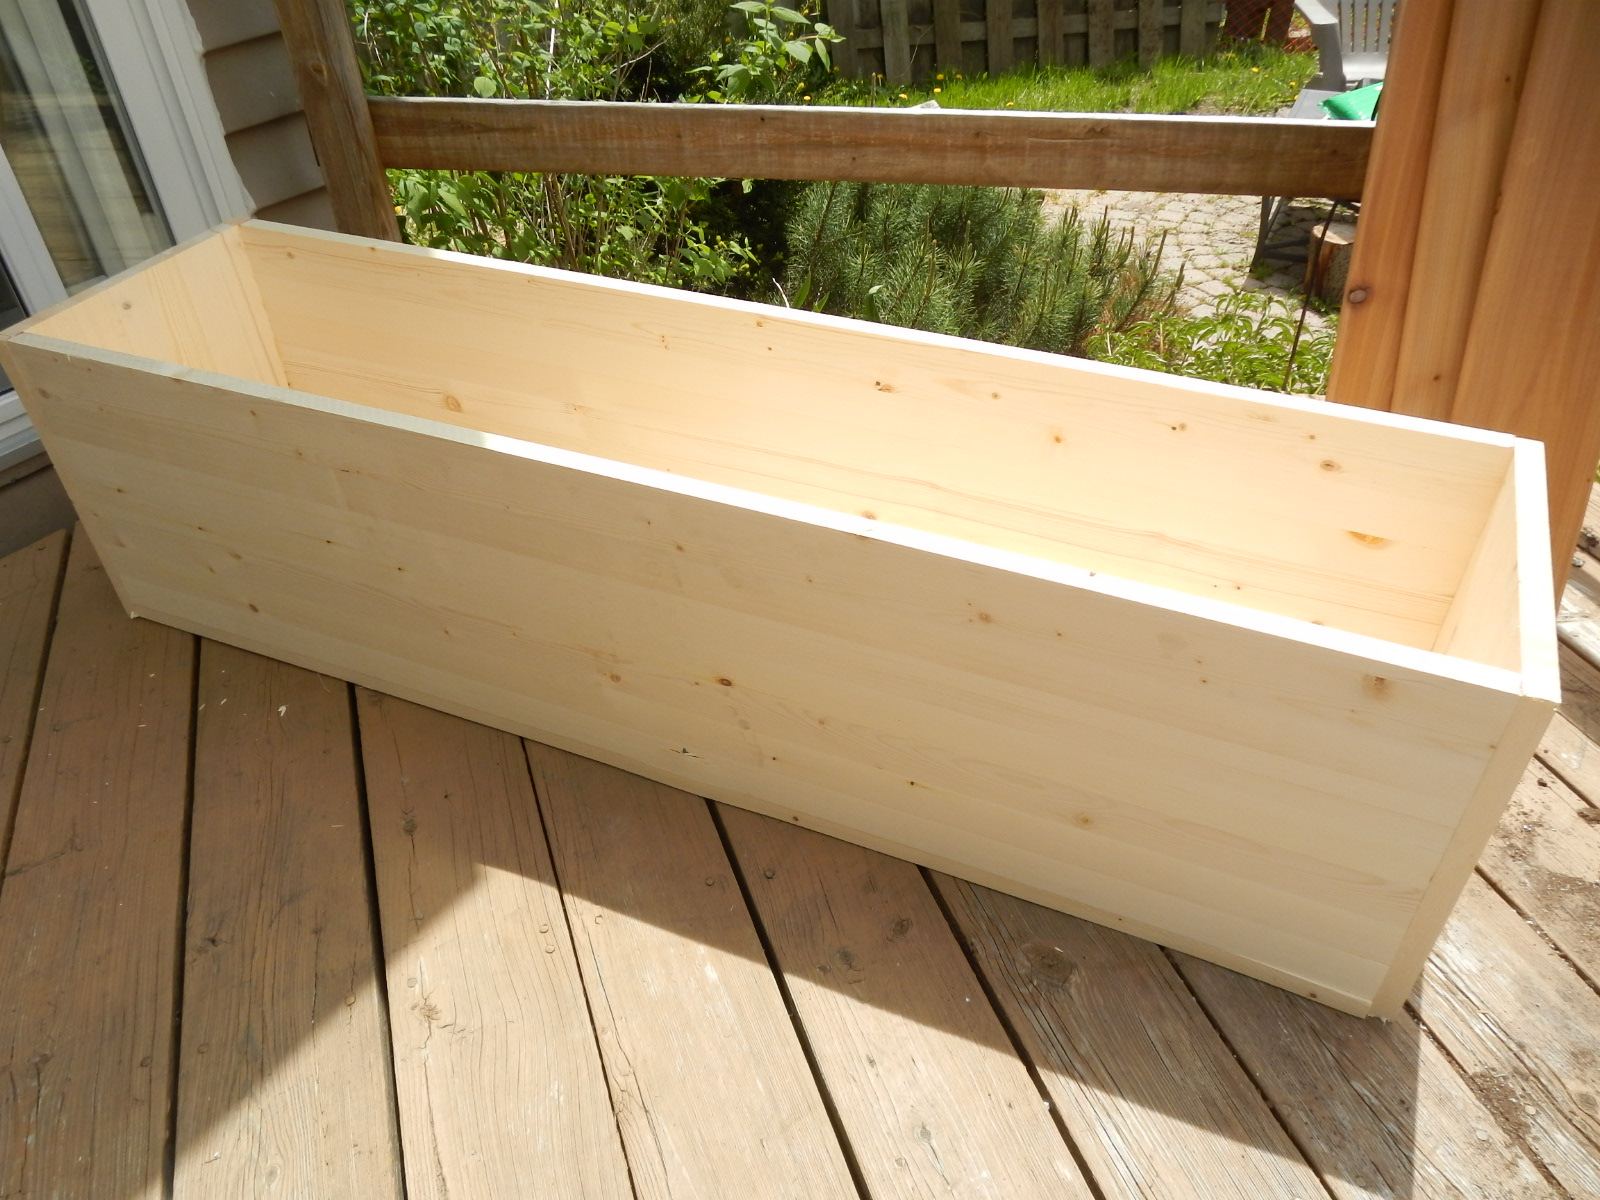 Planting for Privacy – DIY Wood Planter just decorate!